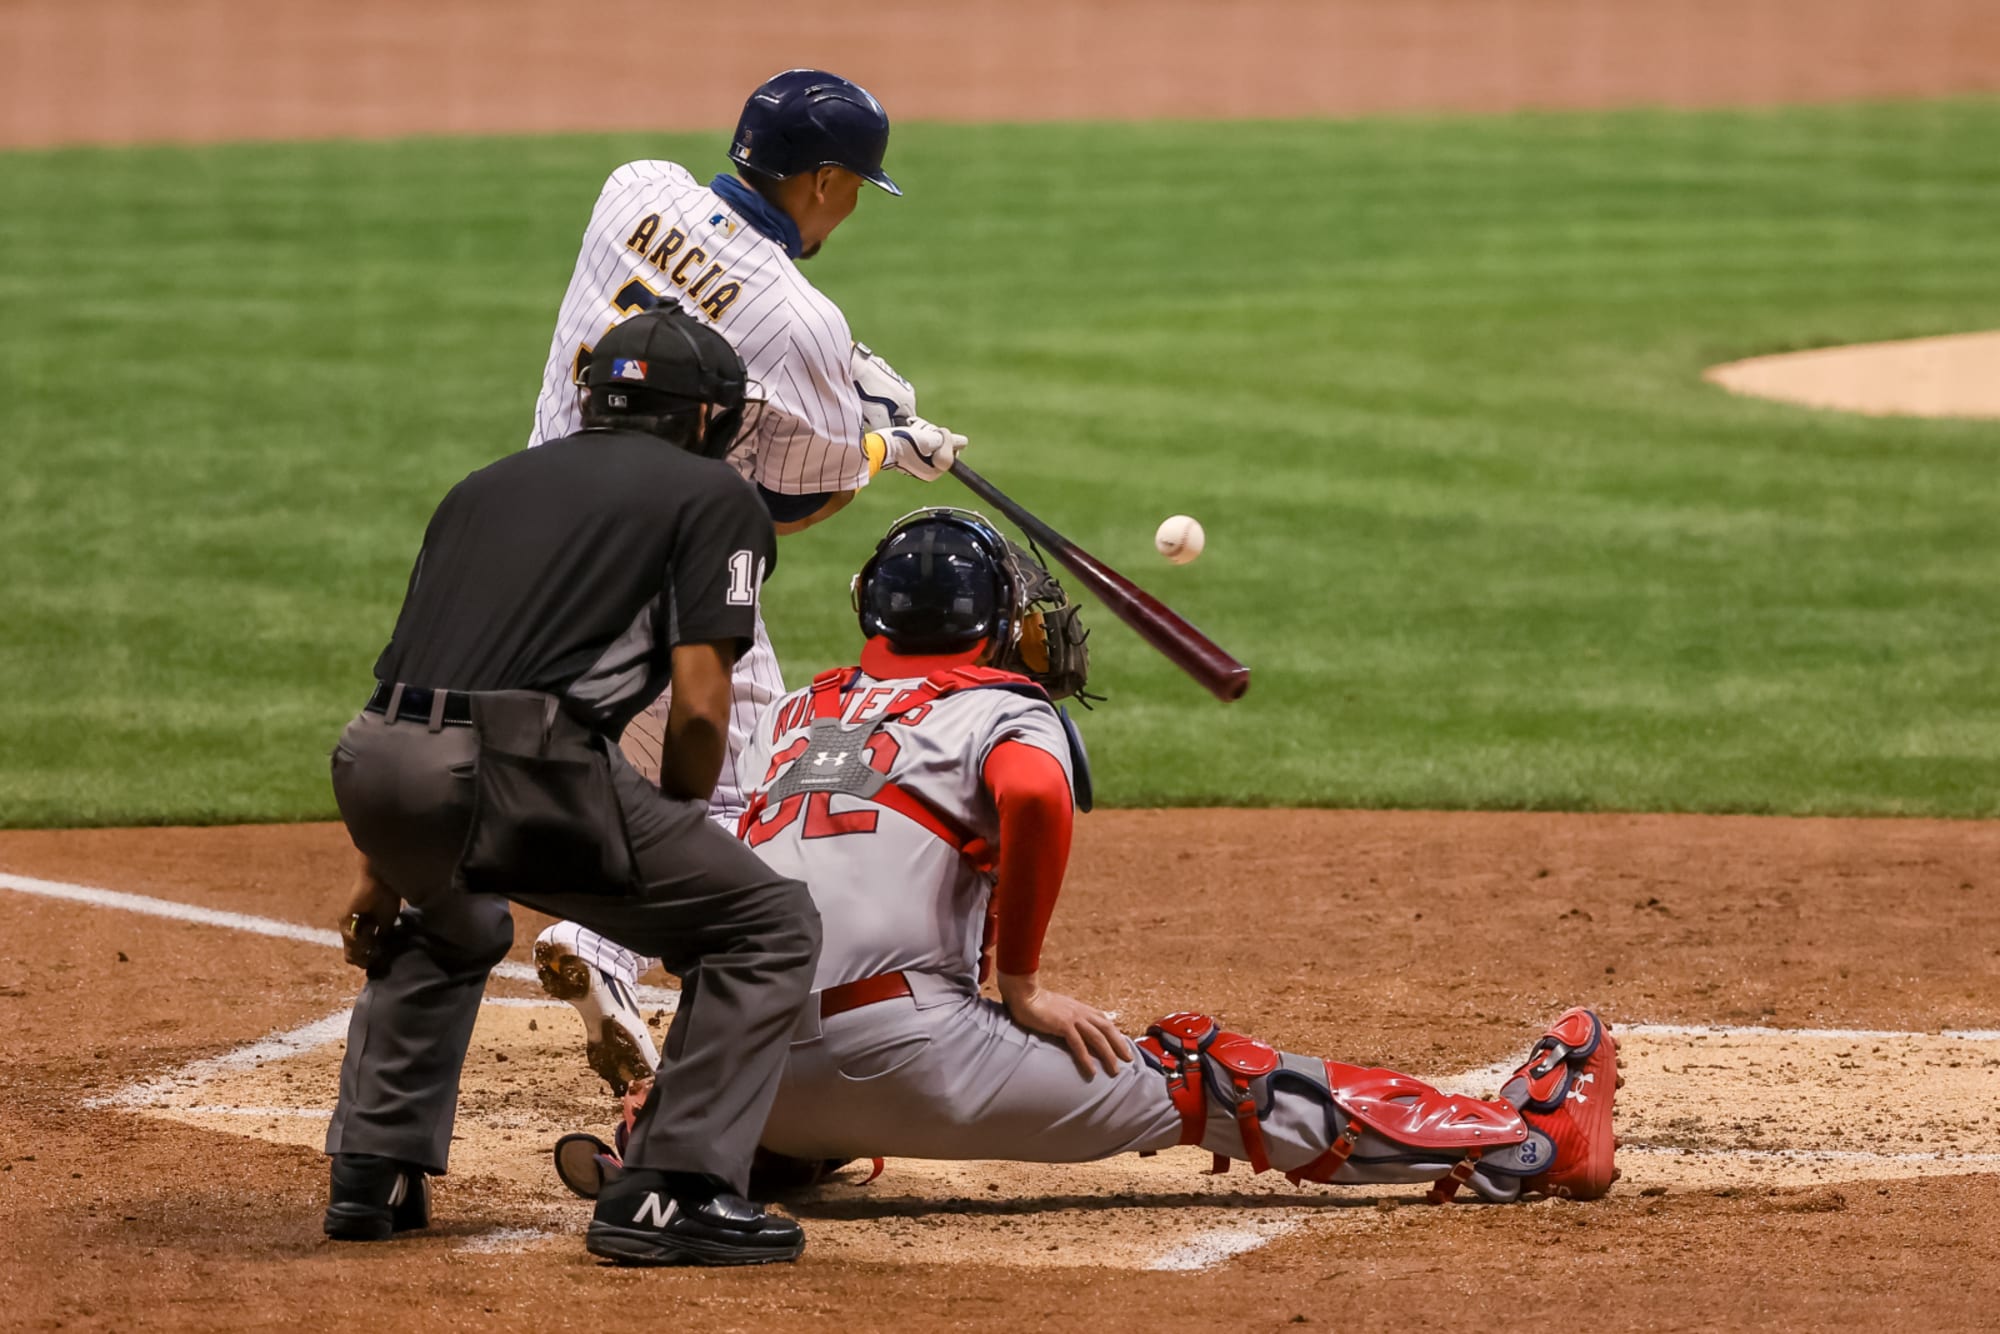 The weekend's critical series Milwaukee Brewers vs St. Louis Cardinals